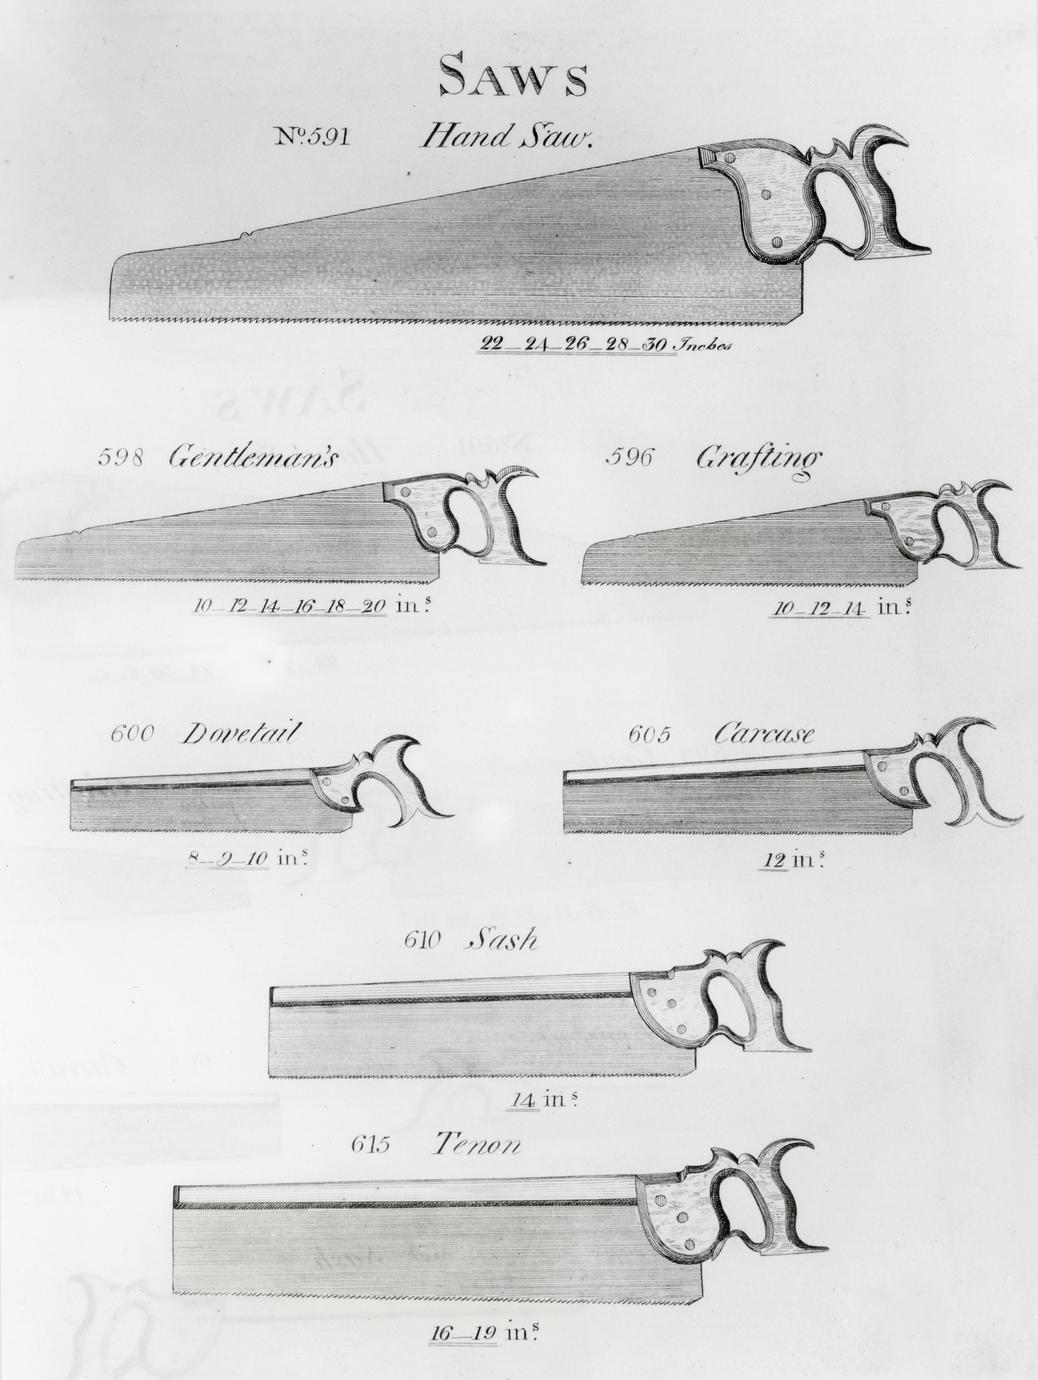 Black and white illustration of various hand saws.